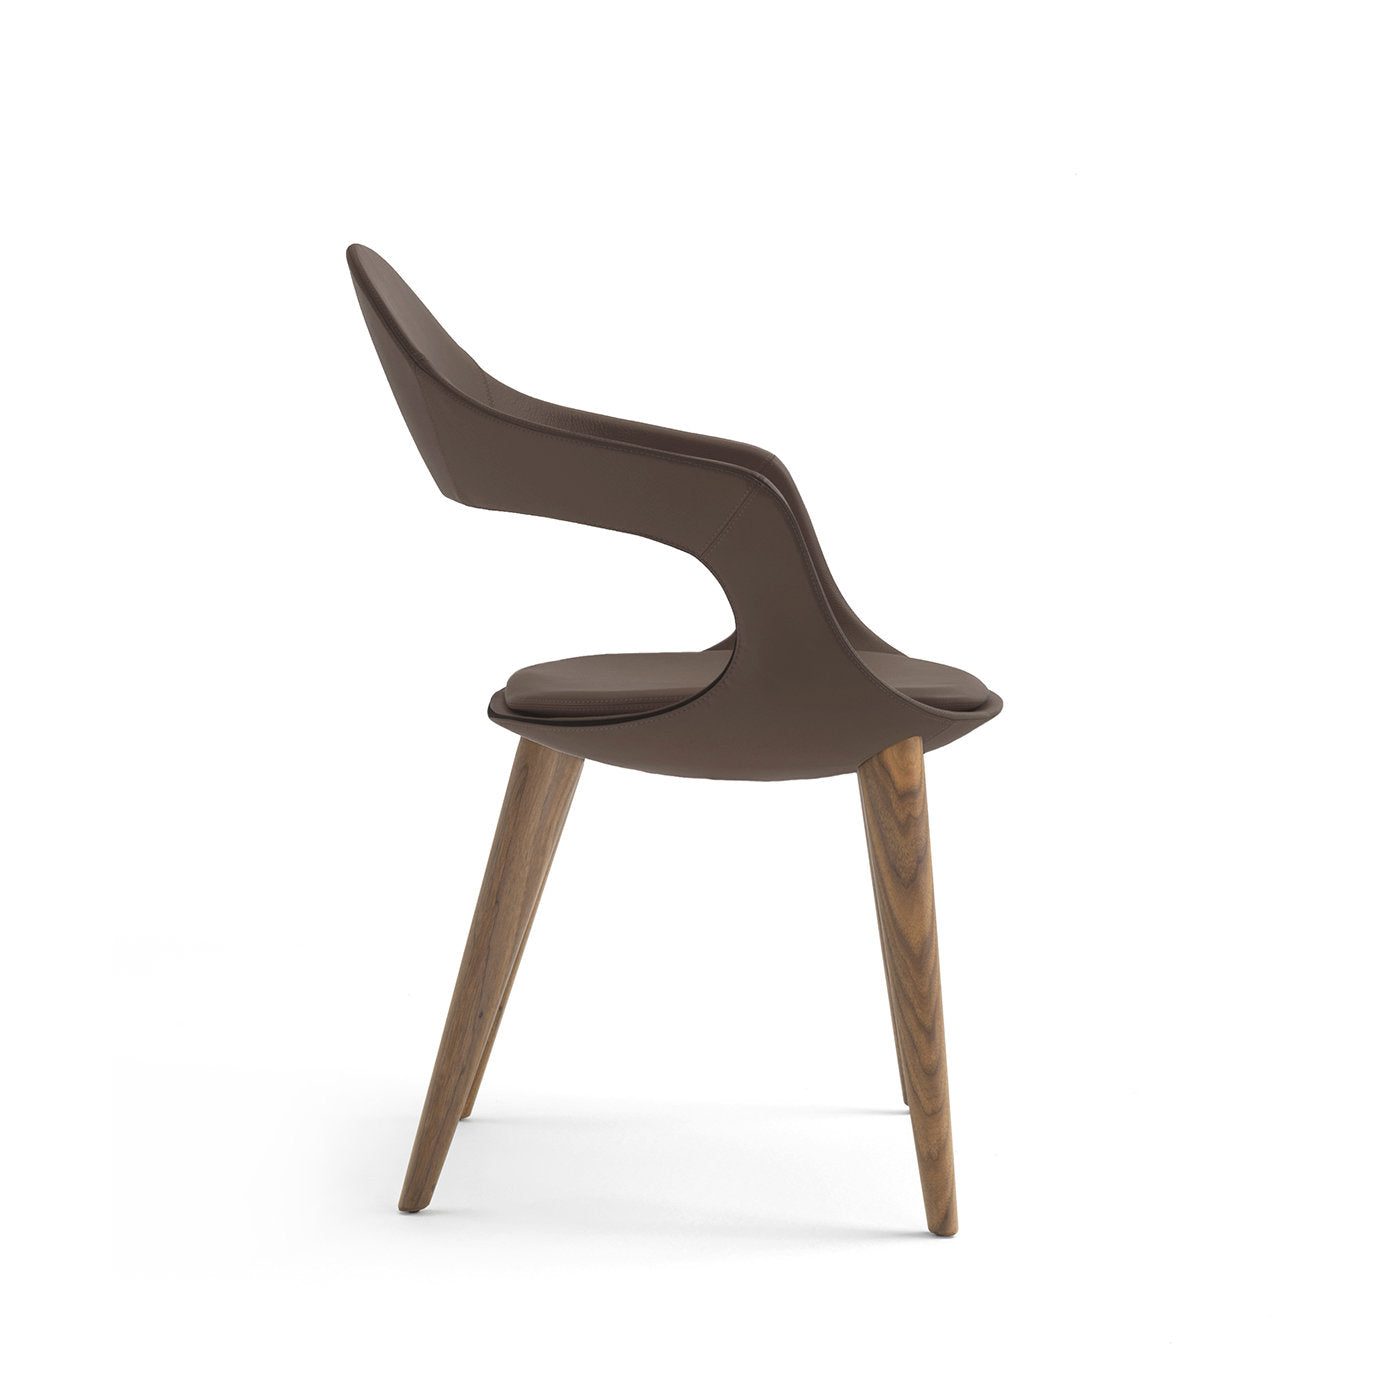 Frenchkiss High-Backed Wooden-Legged Chair by Stefano Bigi - Alternative view 1